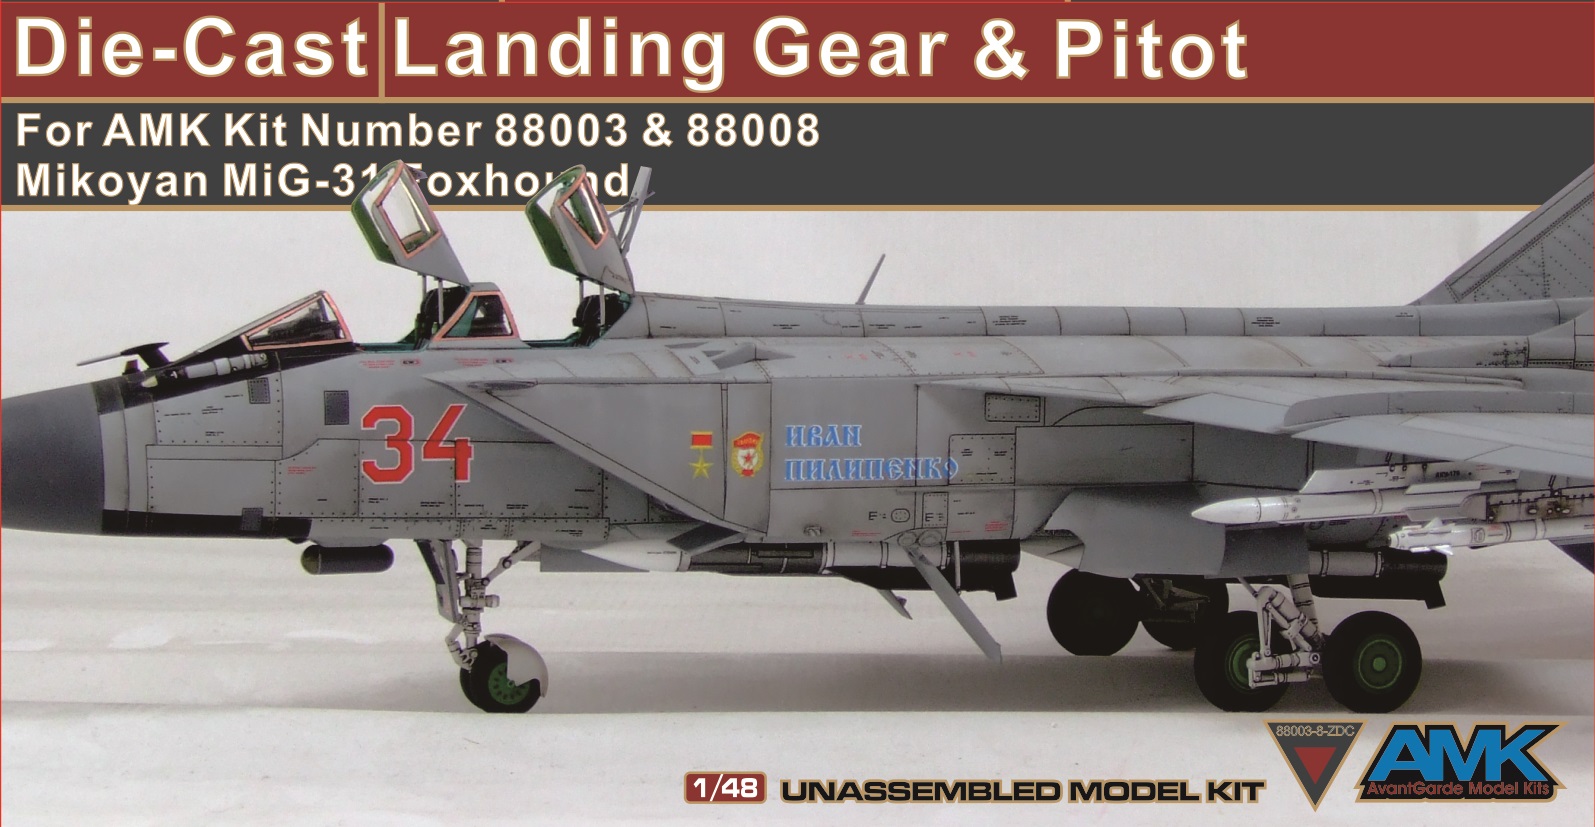 Metal Landing Gear and Pitot for MiG-31 Foxhound